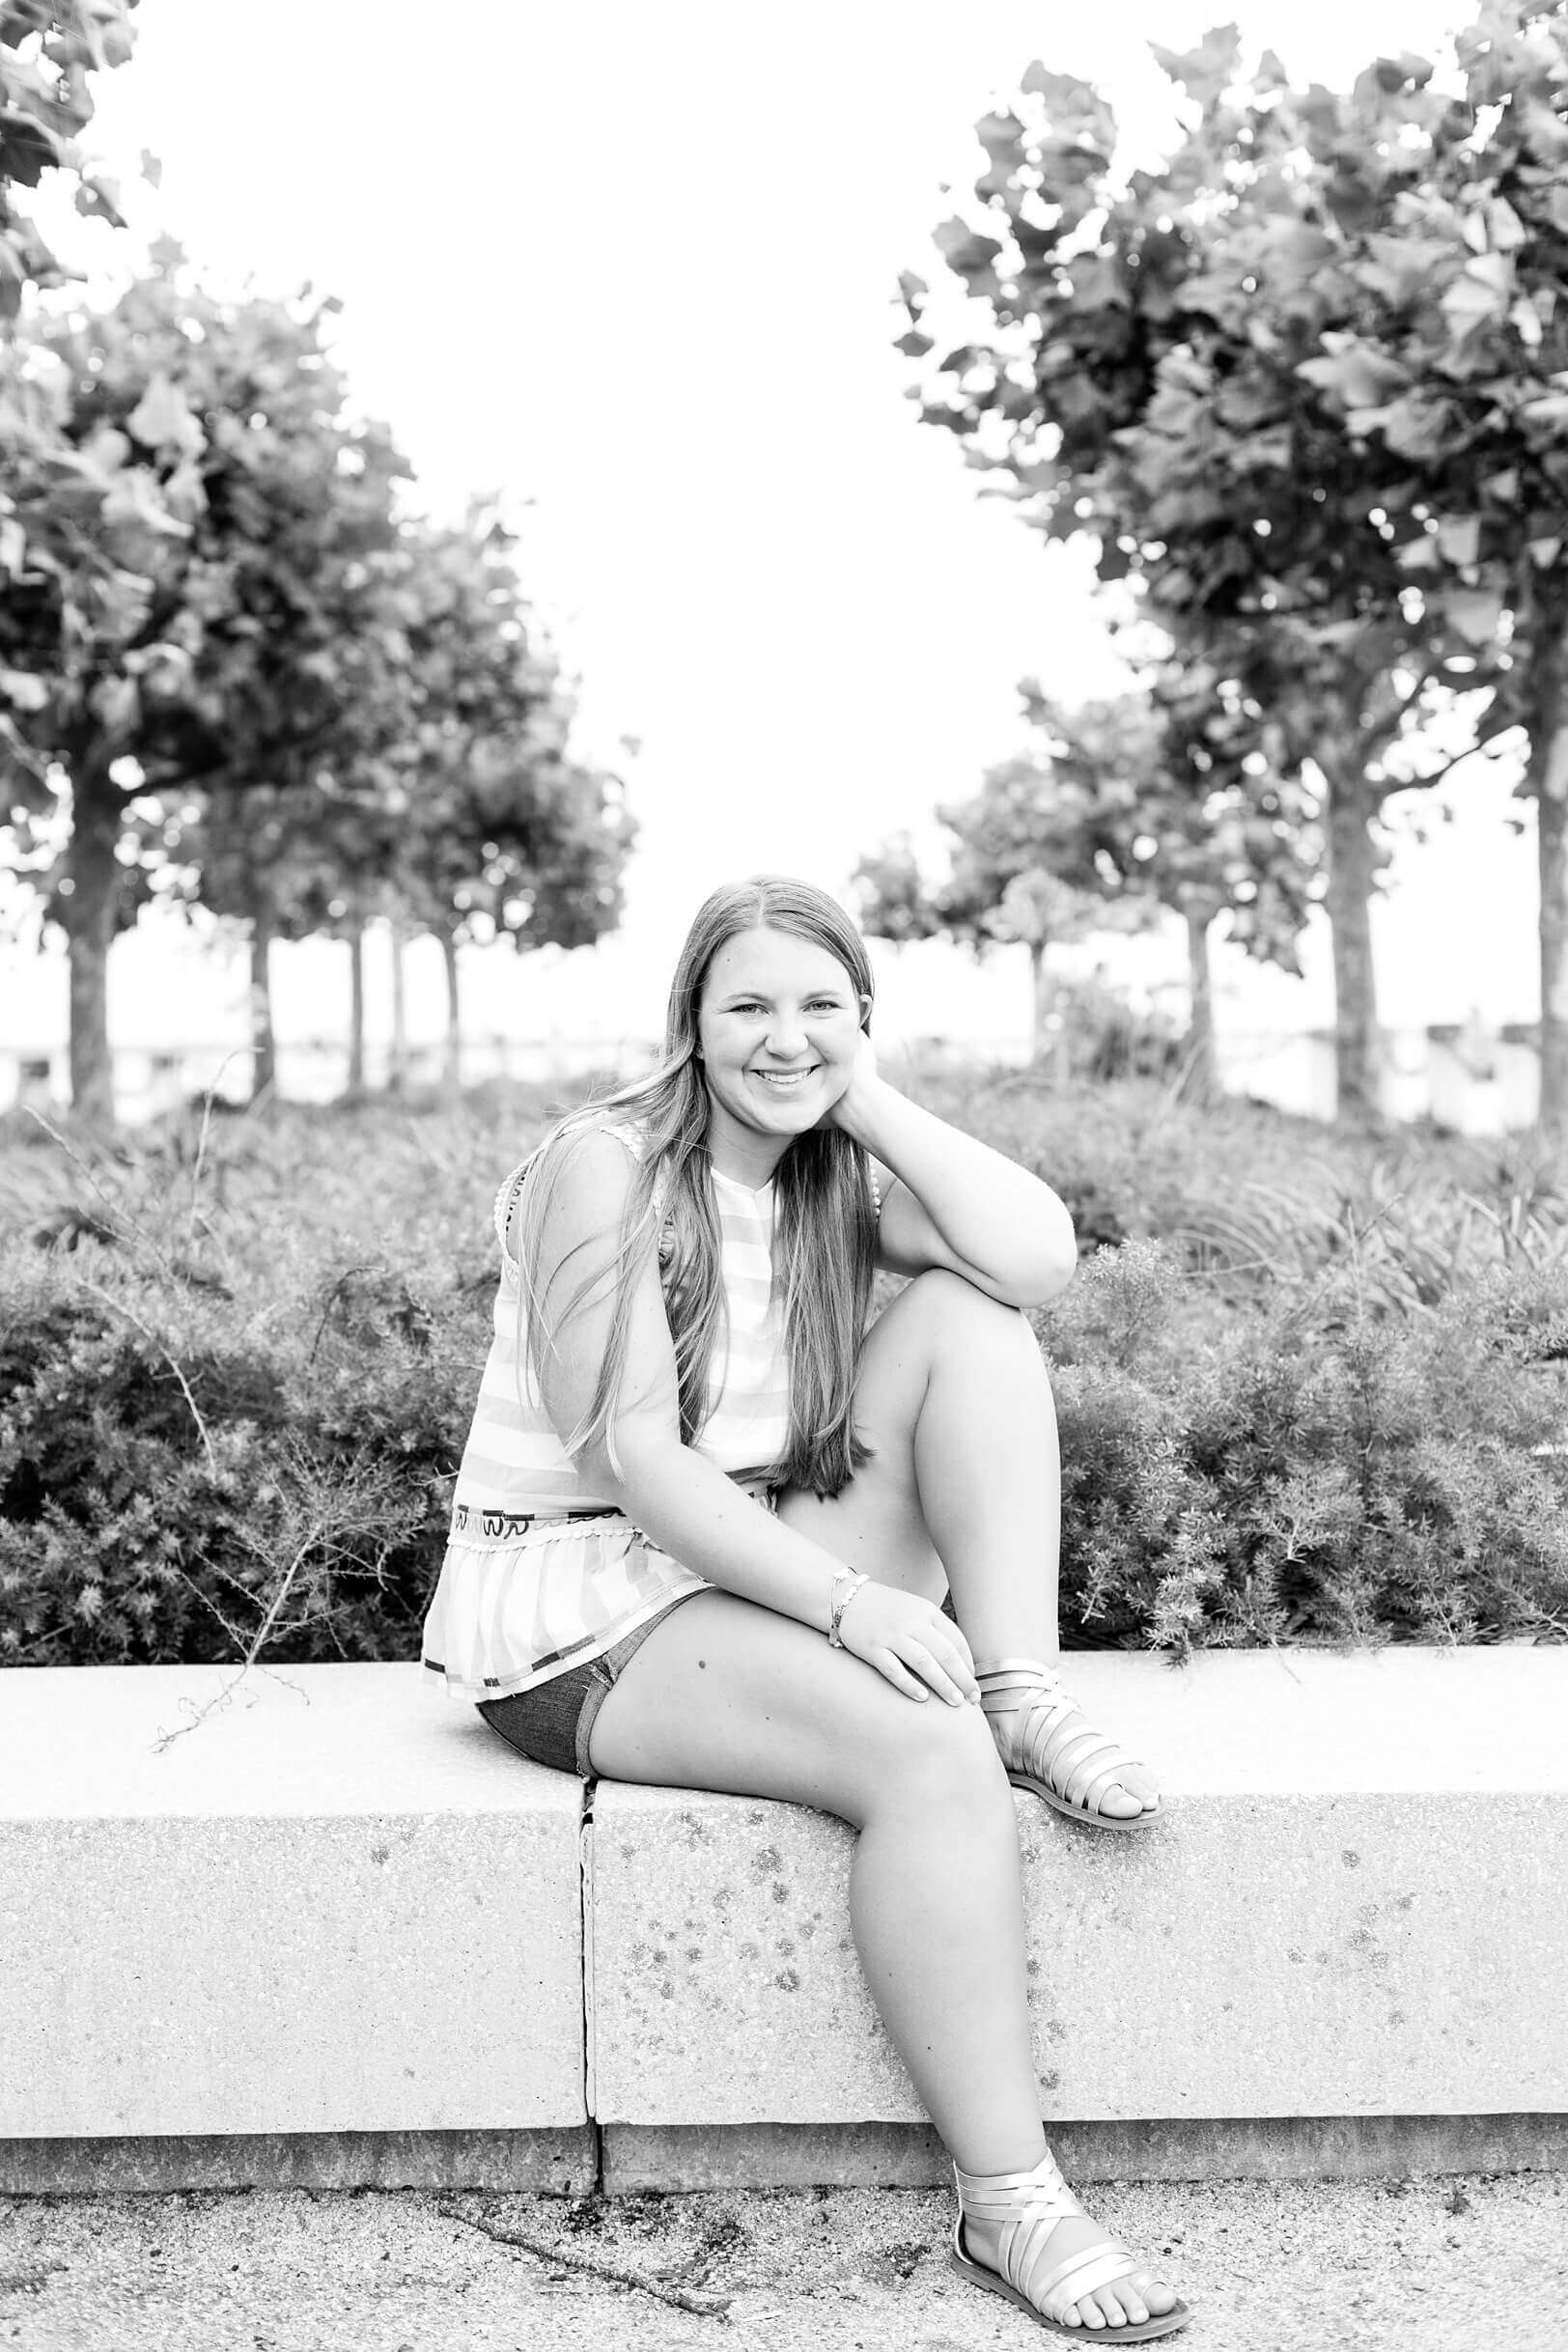 BW Outdoor Senior Photography in park